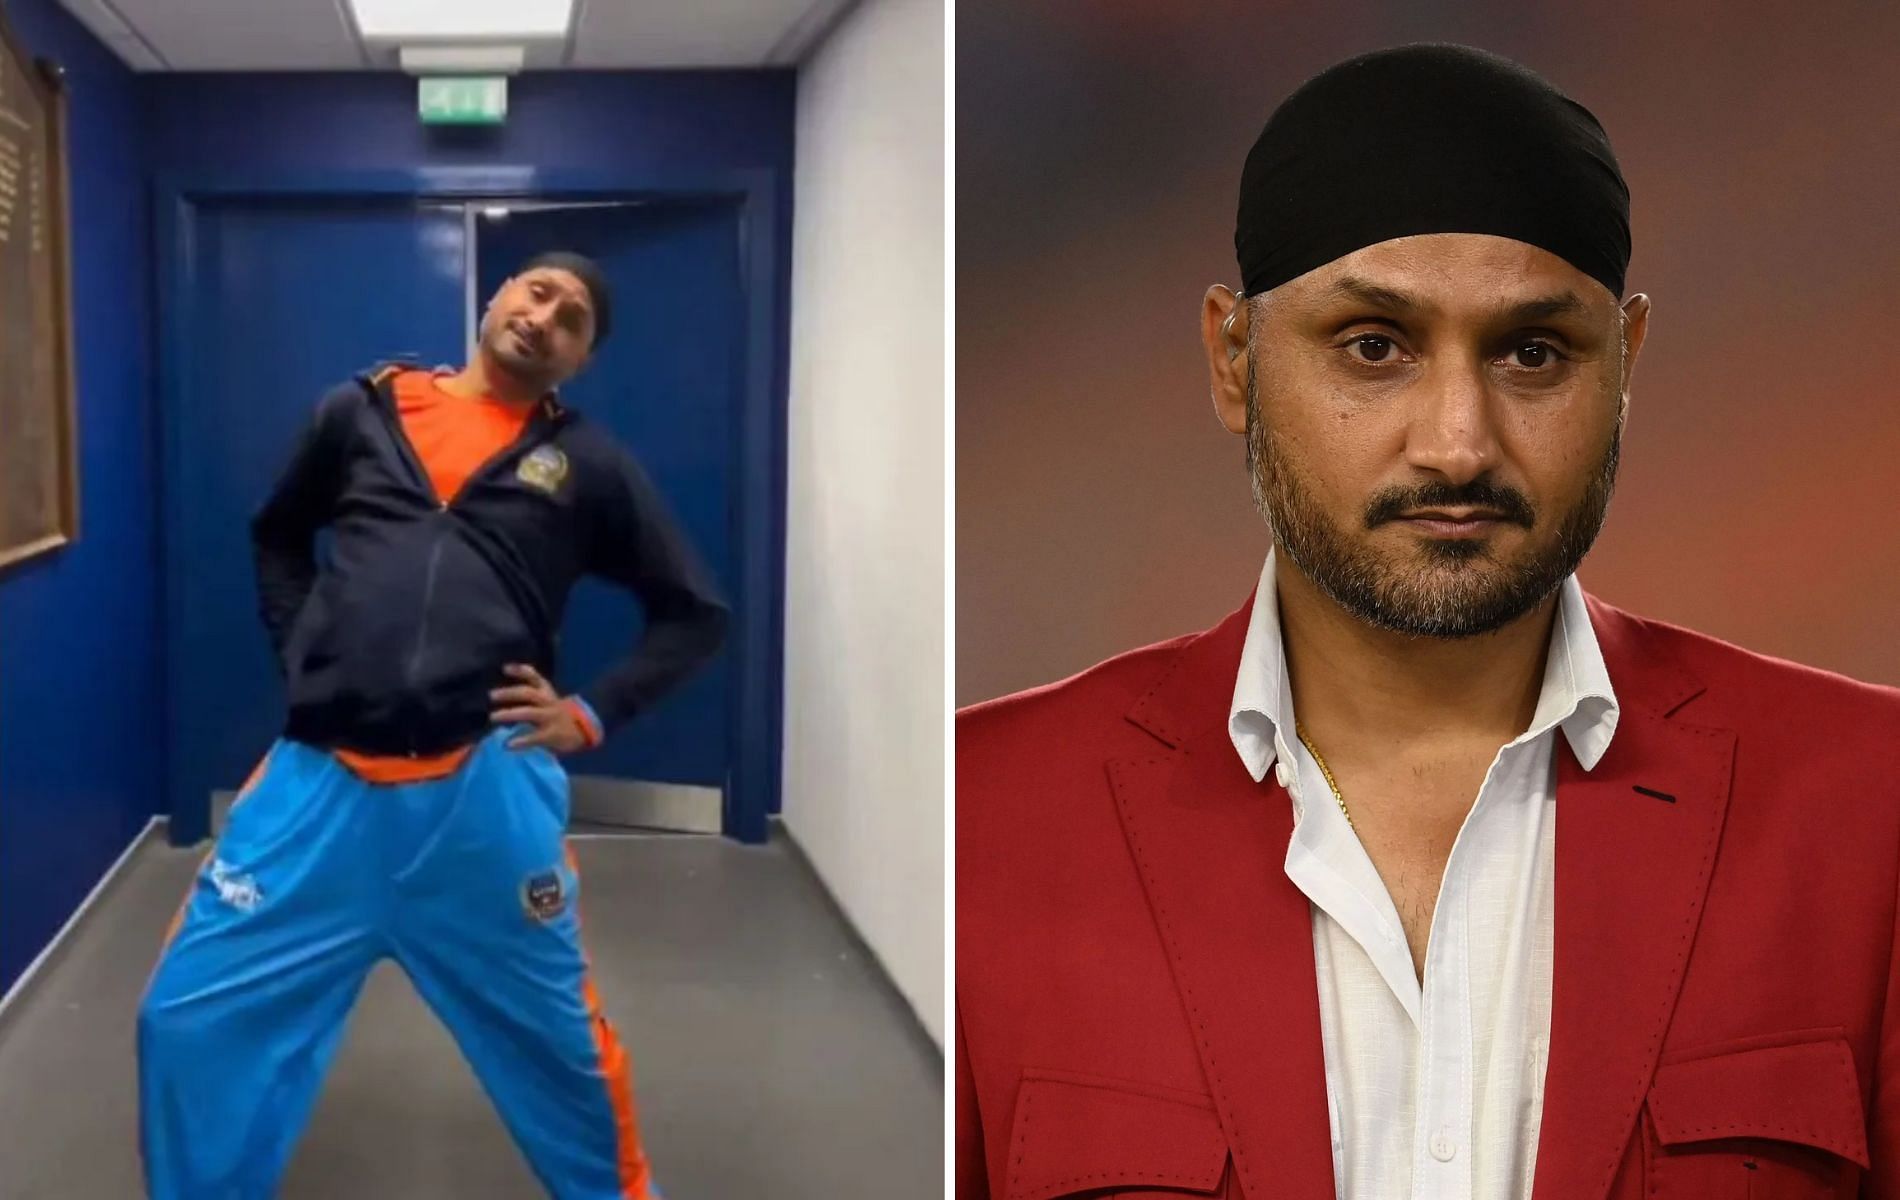 “Not trying to insult or offend anyone” - Harbhajan Singh issues apology after being slammed for viral 'Tauba Tauba' video